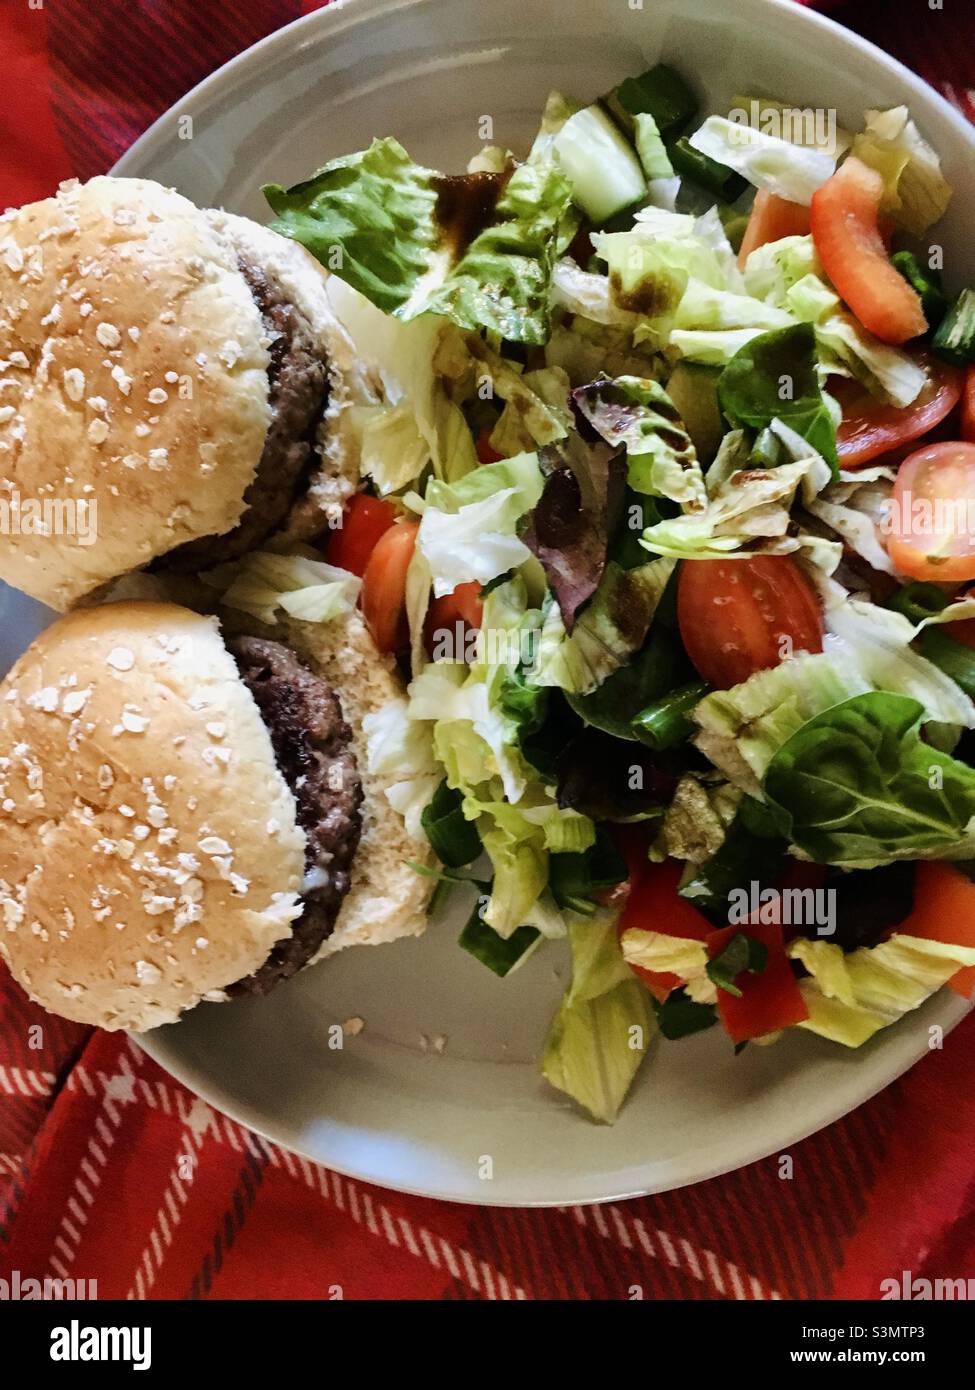 Barbecue picnic in Scotland.  Burgers with salad on a tartan picnic blanket Stock Photo